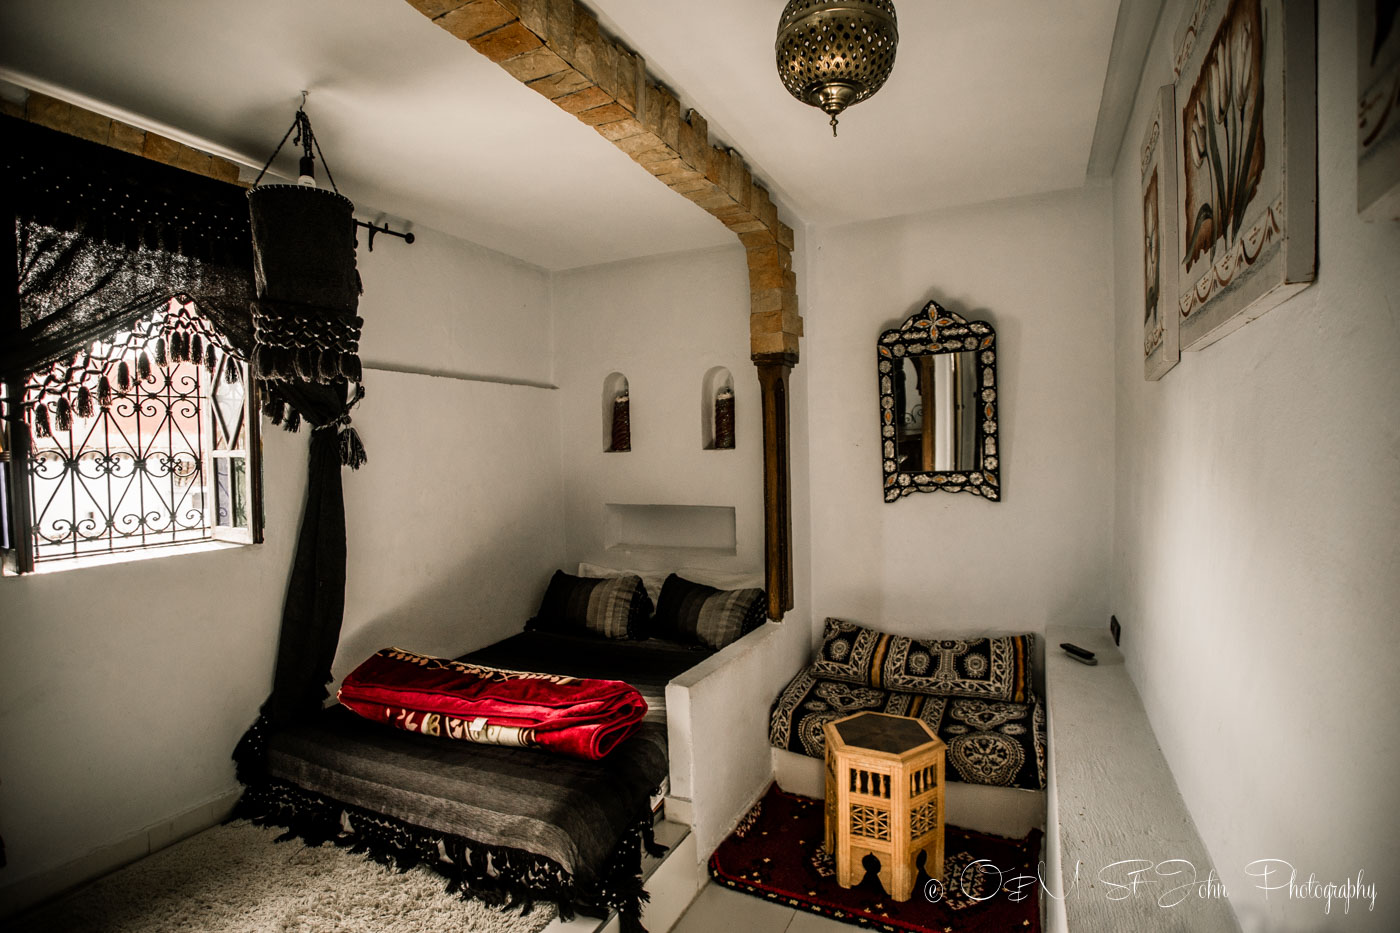 Inside our riad, Maison Hotel, in Chefchaouen. Morocco